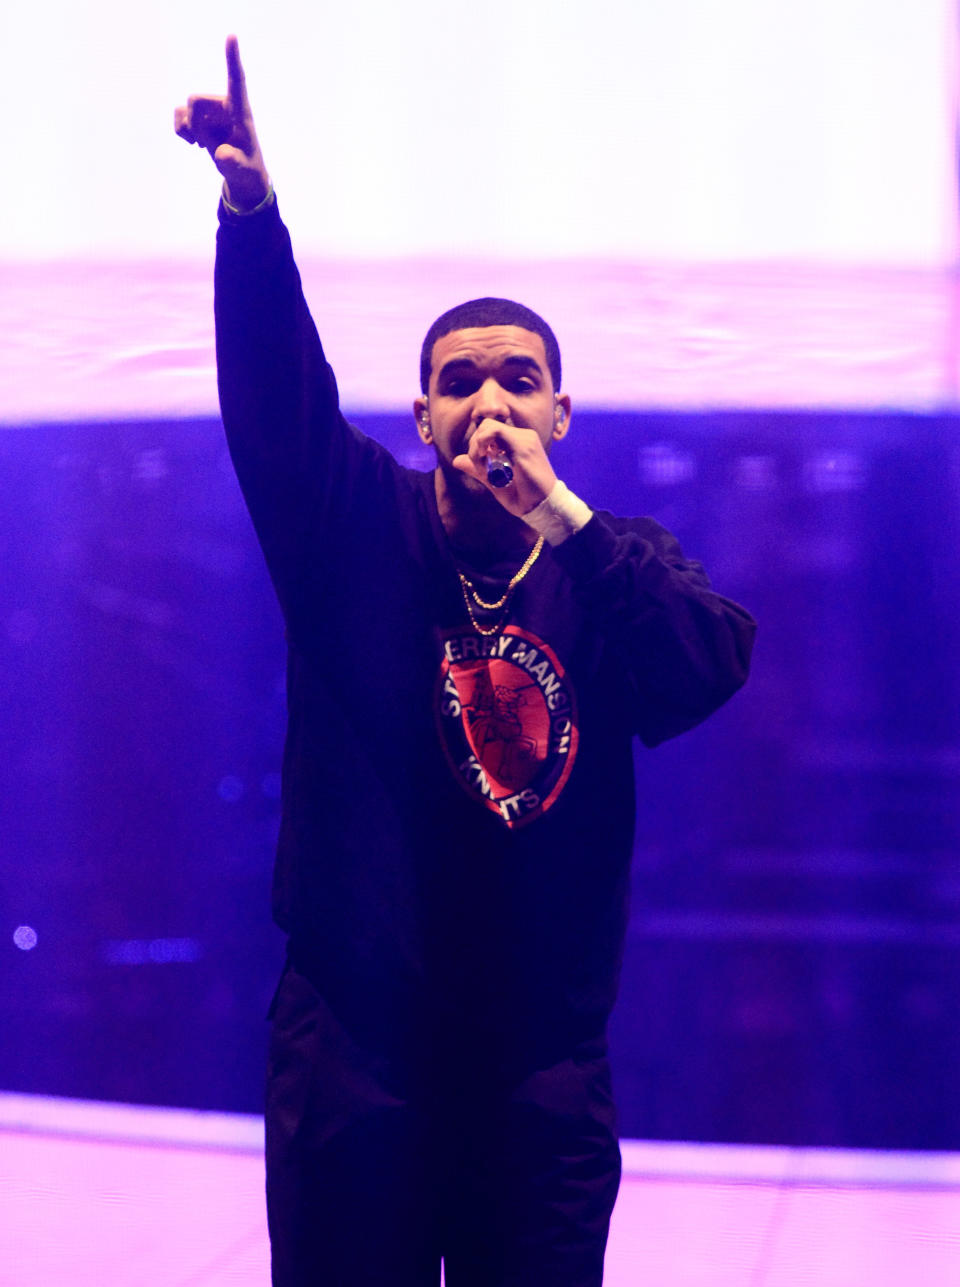 Rapper Drake performs in concert on the last date of his "Would You Like A Tour? 2013" at the Wells Fargo Center on Wednesday, Dec. 18, 2013, in Philadelphia. (Photo by Owen Sweeney/Invision/AP)